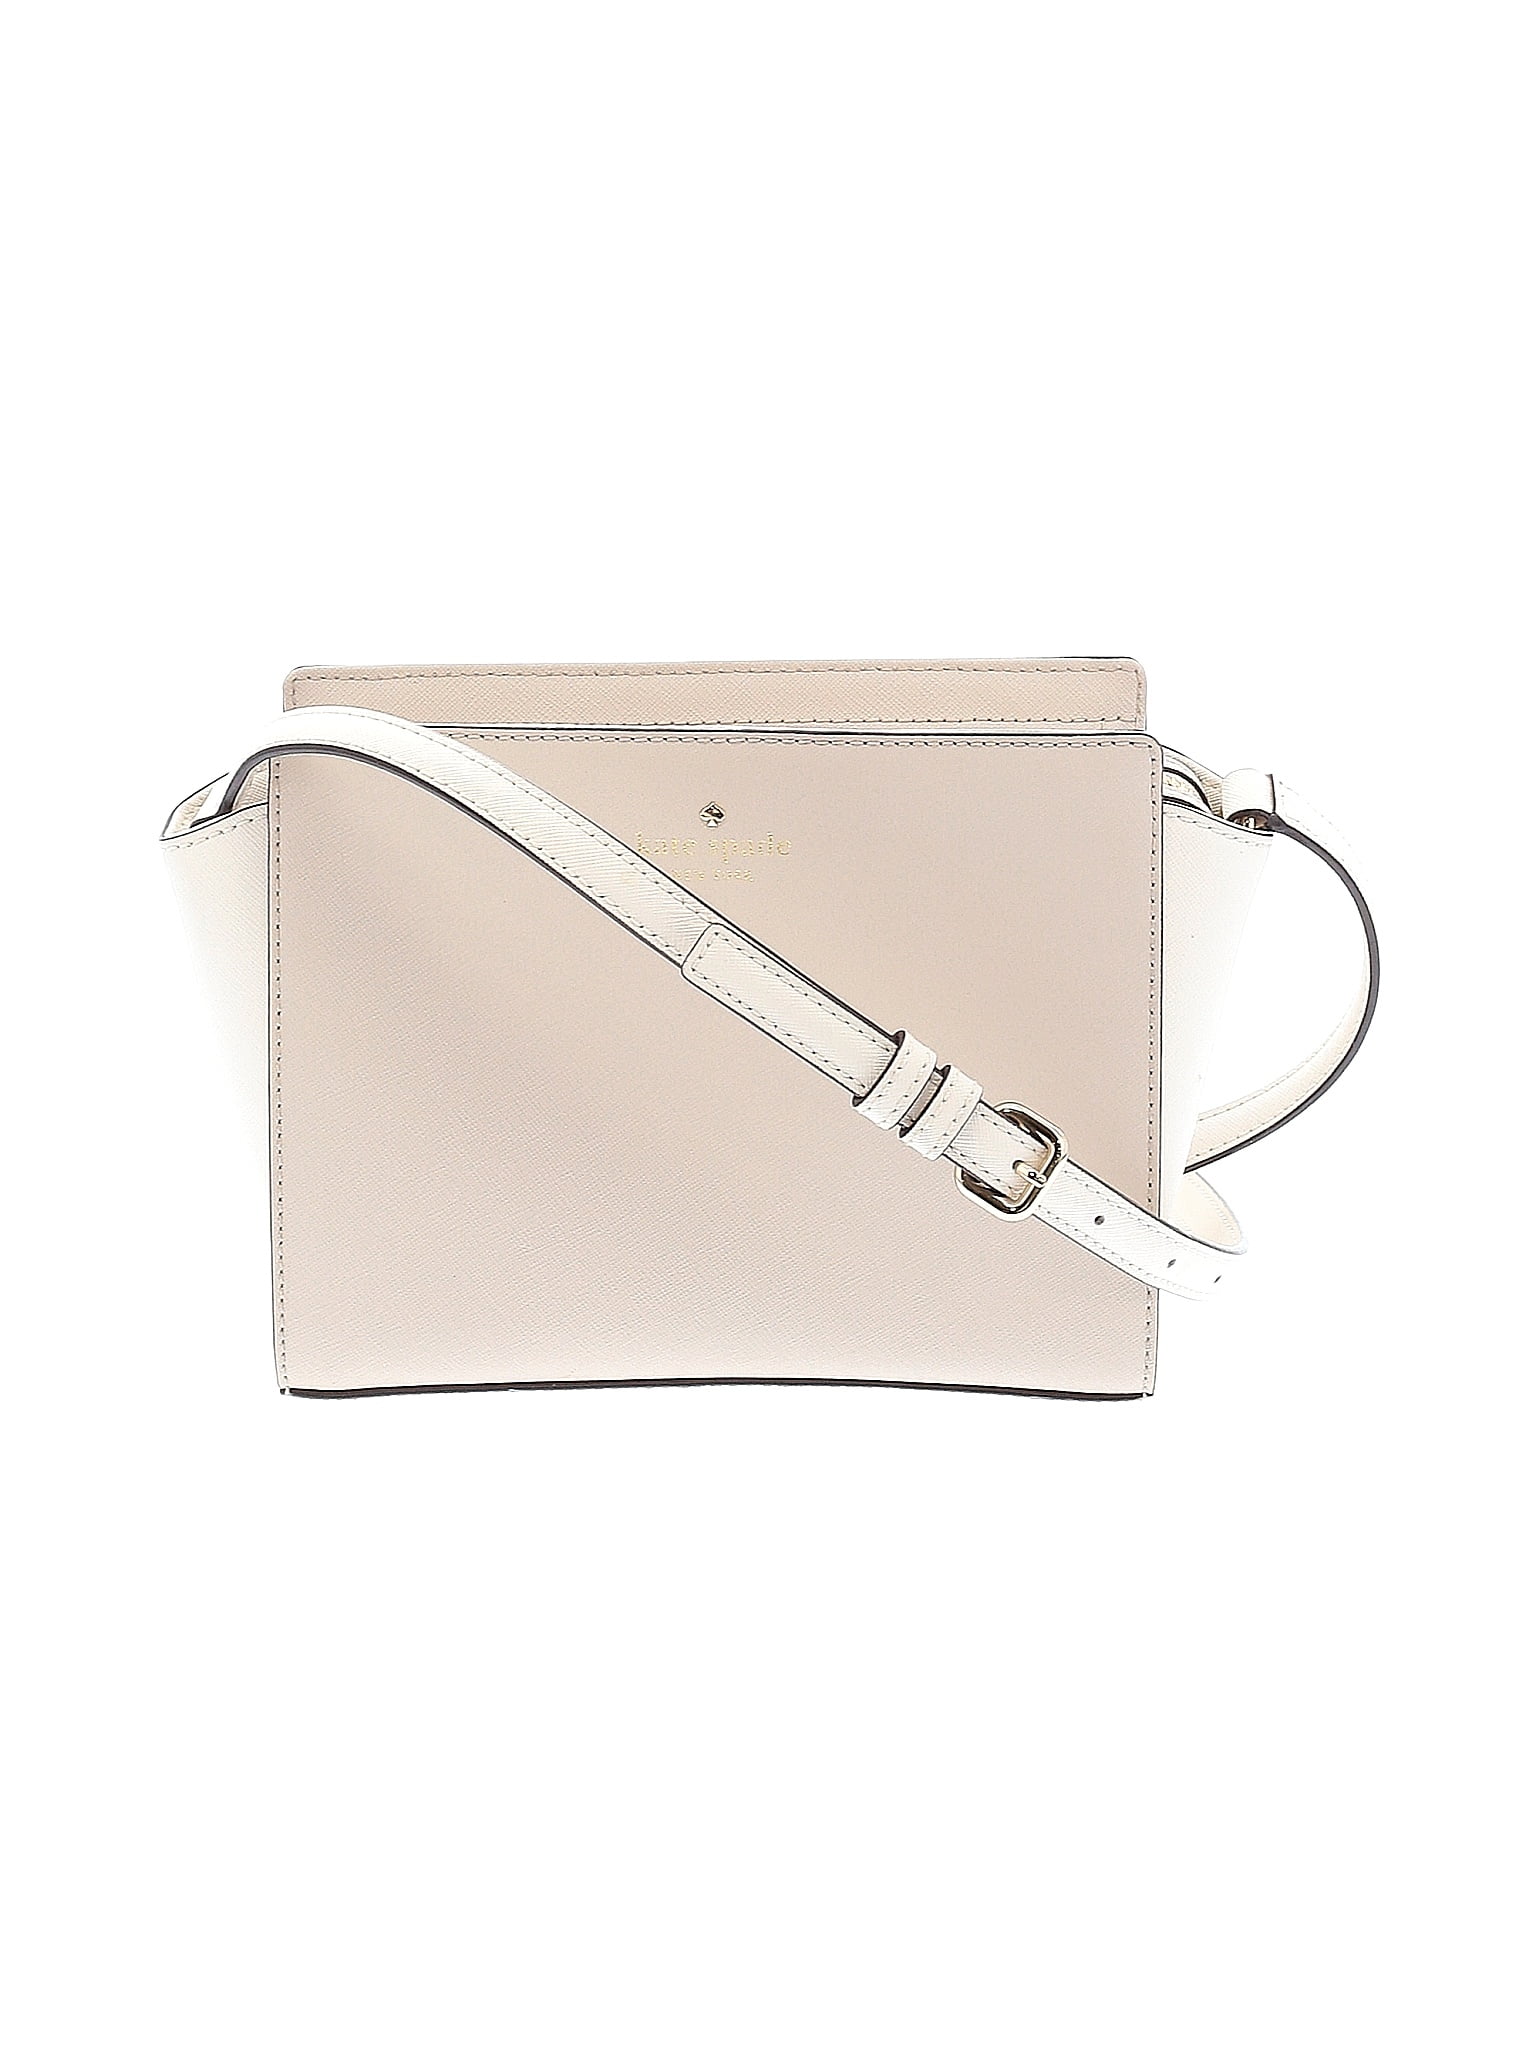 Kate Spade New York 100% Cow Leather Color Block Solid Ivory Crossbody ...